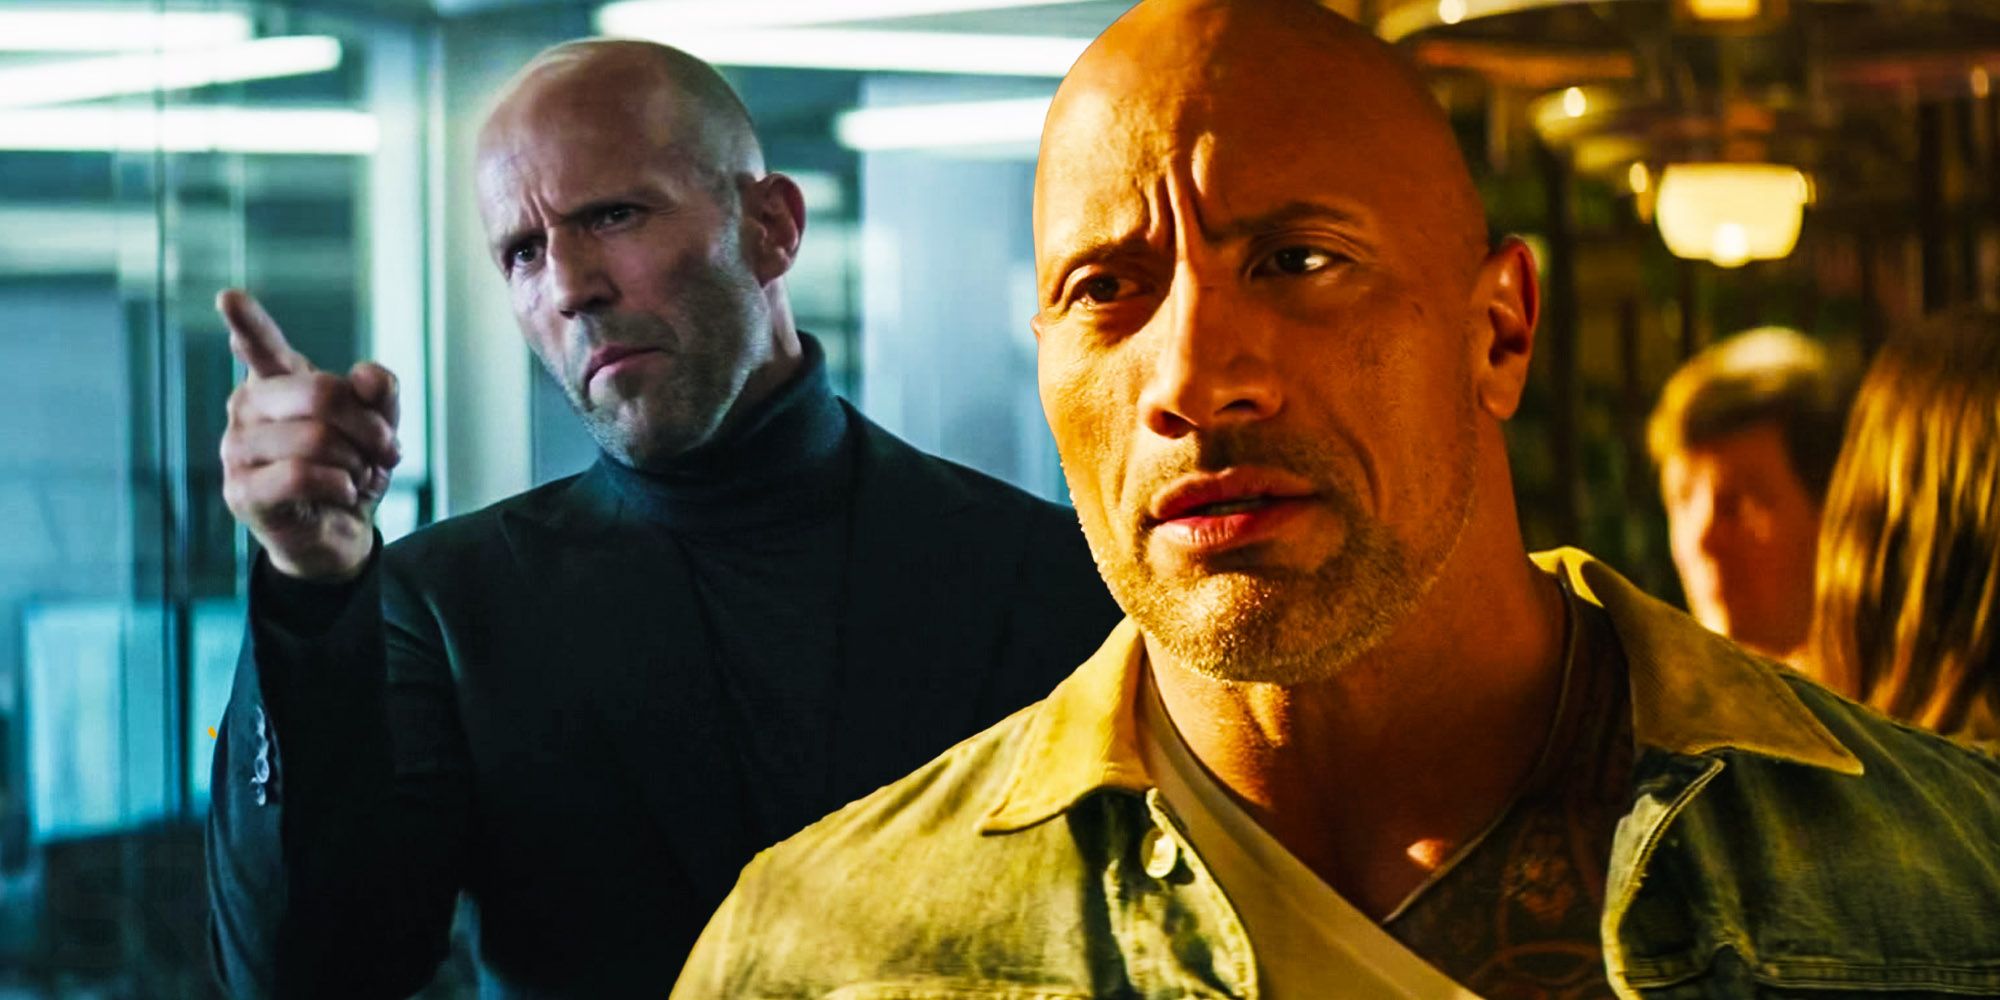 the rock as hobbs and jason statham as shaw